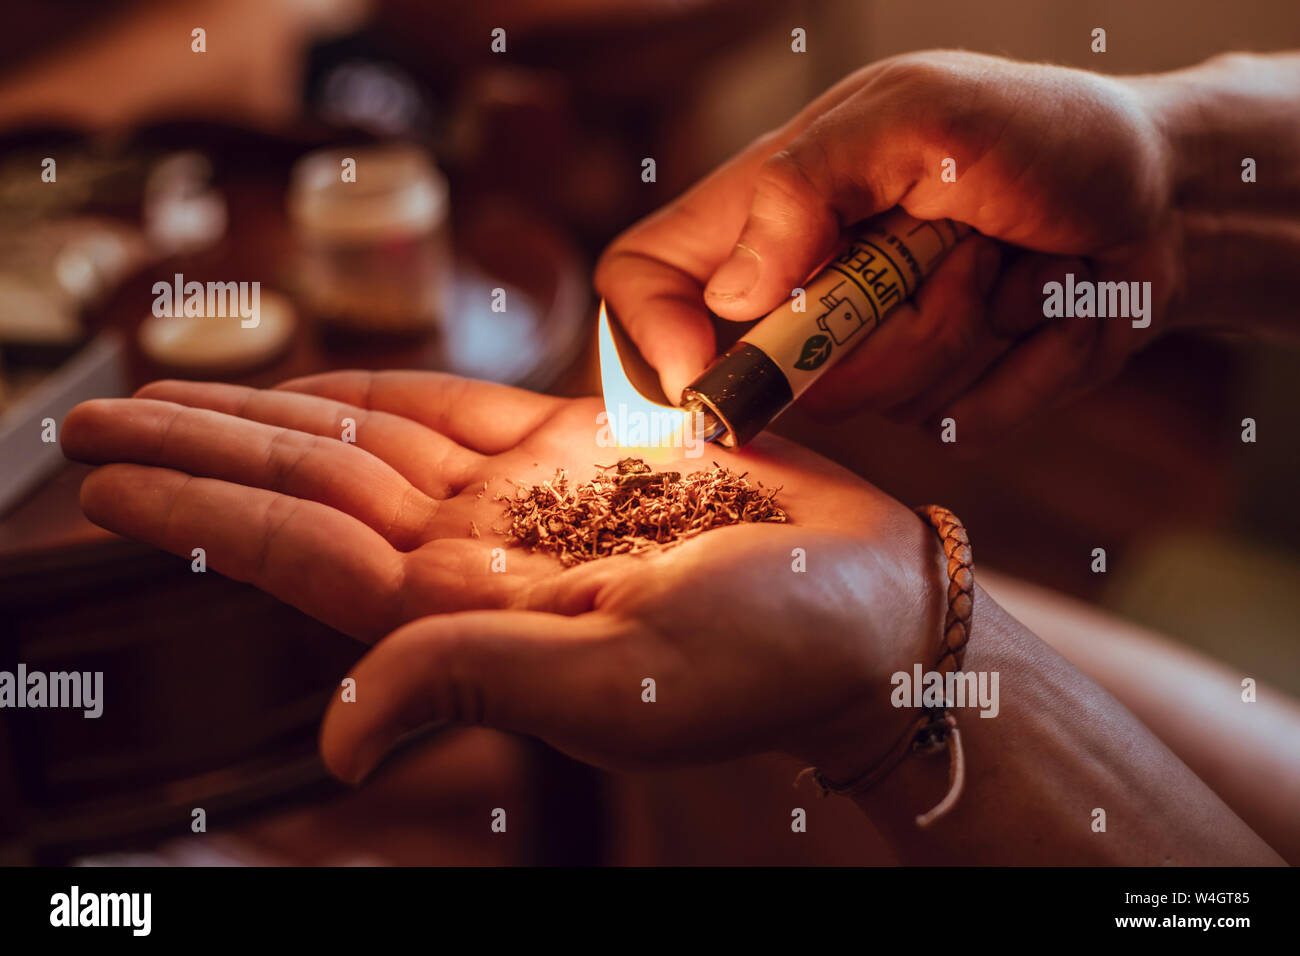 Close-up of hands burning tobacco and hashish with a lighter Stock Photo